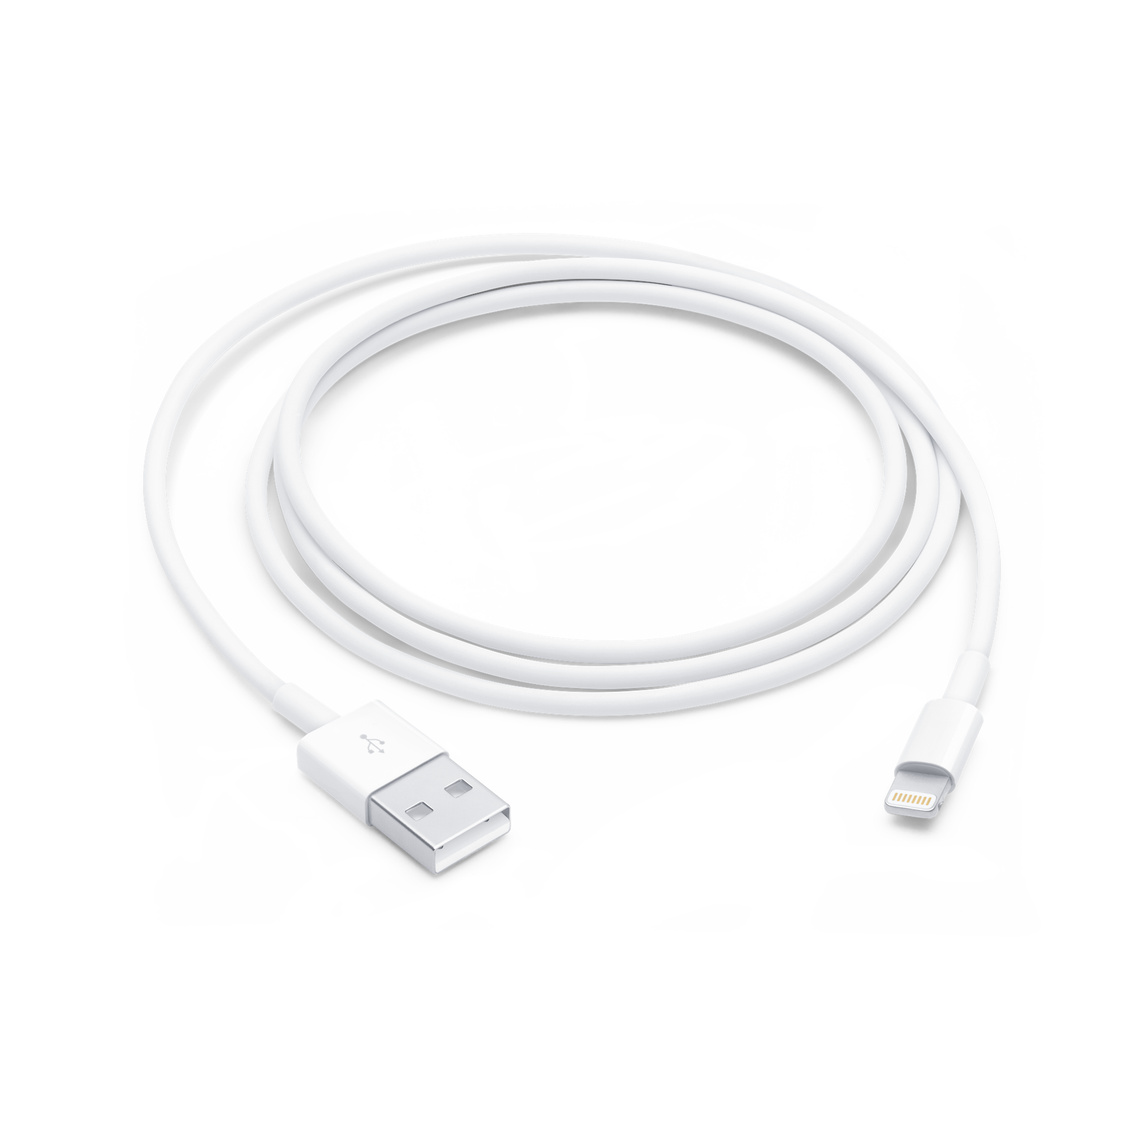 Usb apple data cable 3kl